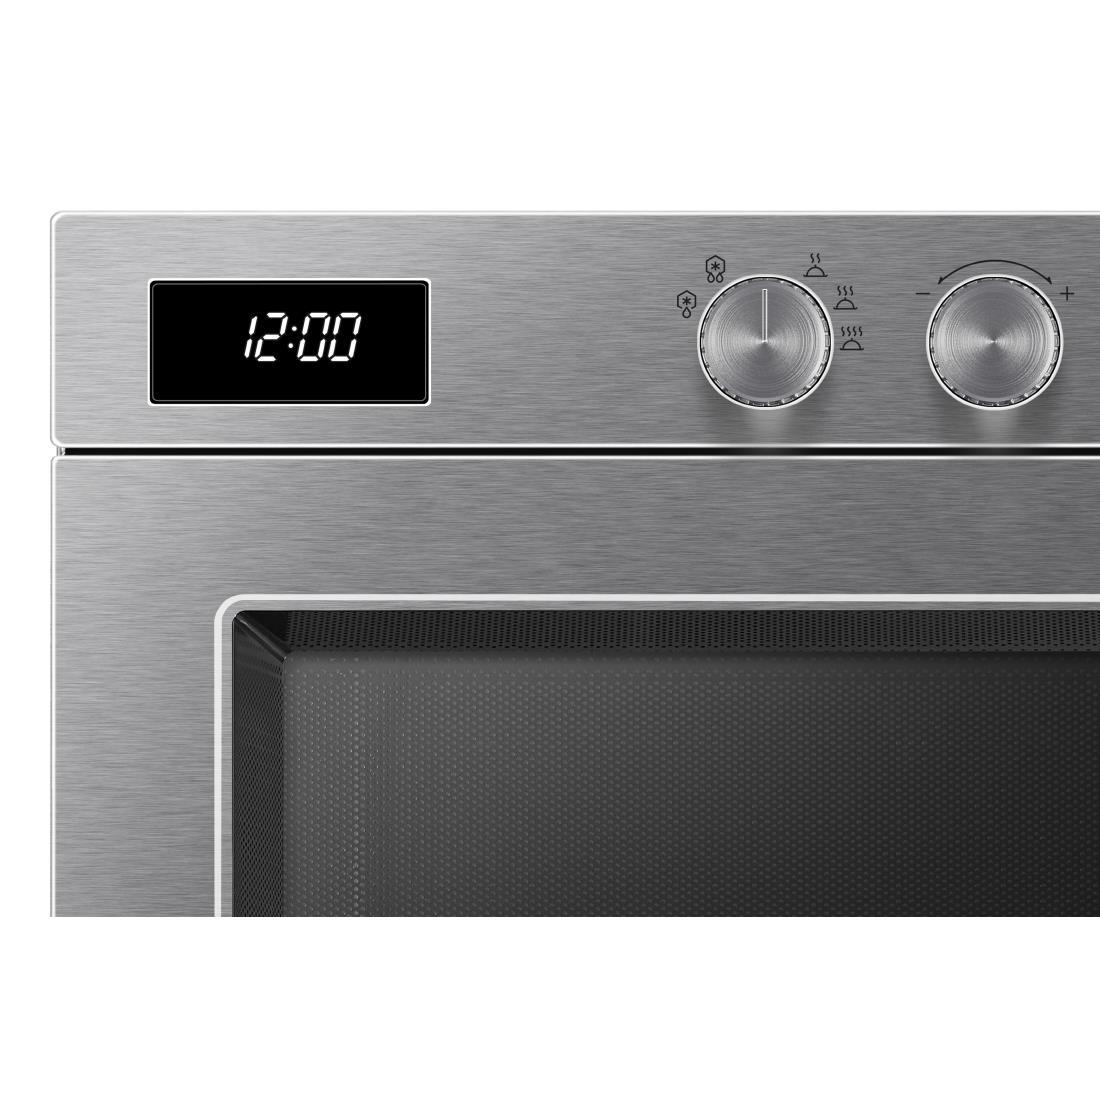 Samsung Commercial Microwave Manual 26Ltr 1850W - FS315  - 4